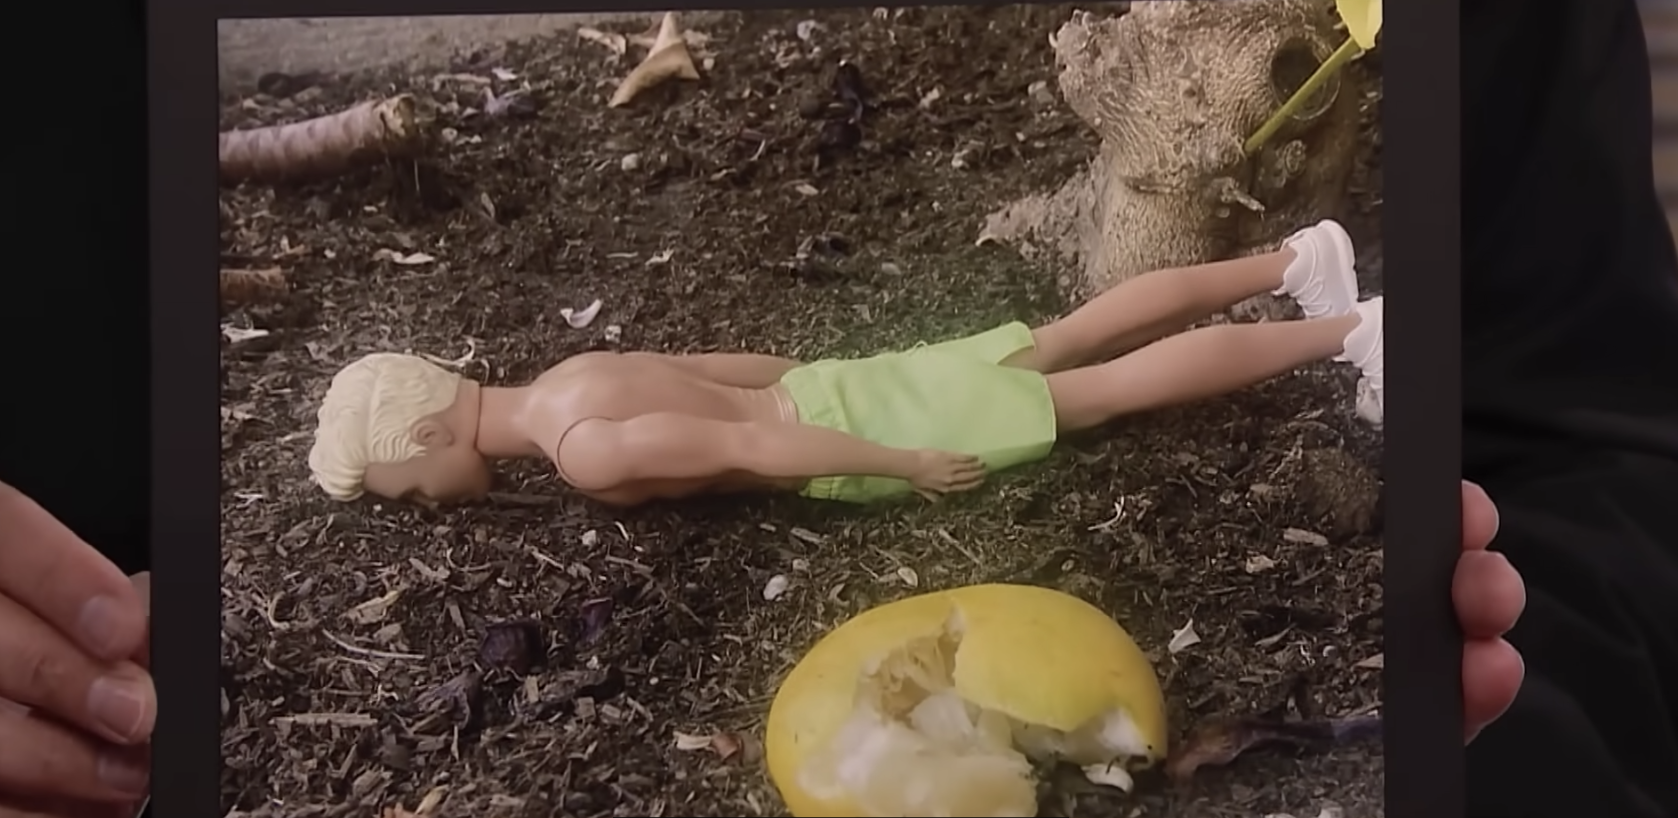 a ken doll face down in the dirt besides the lemon